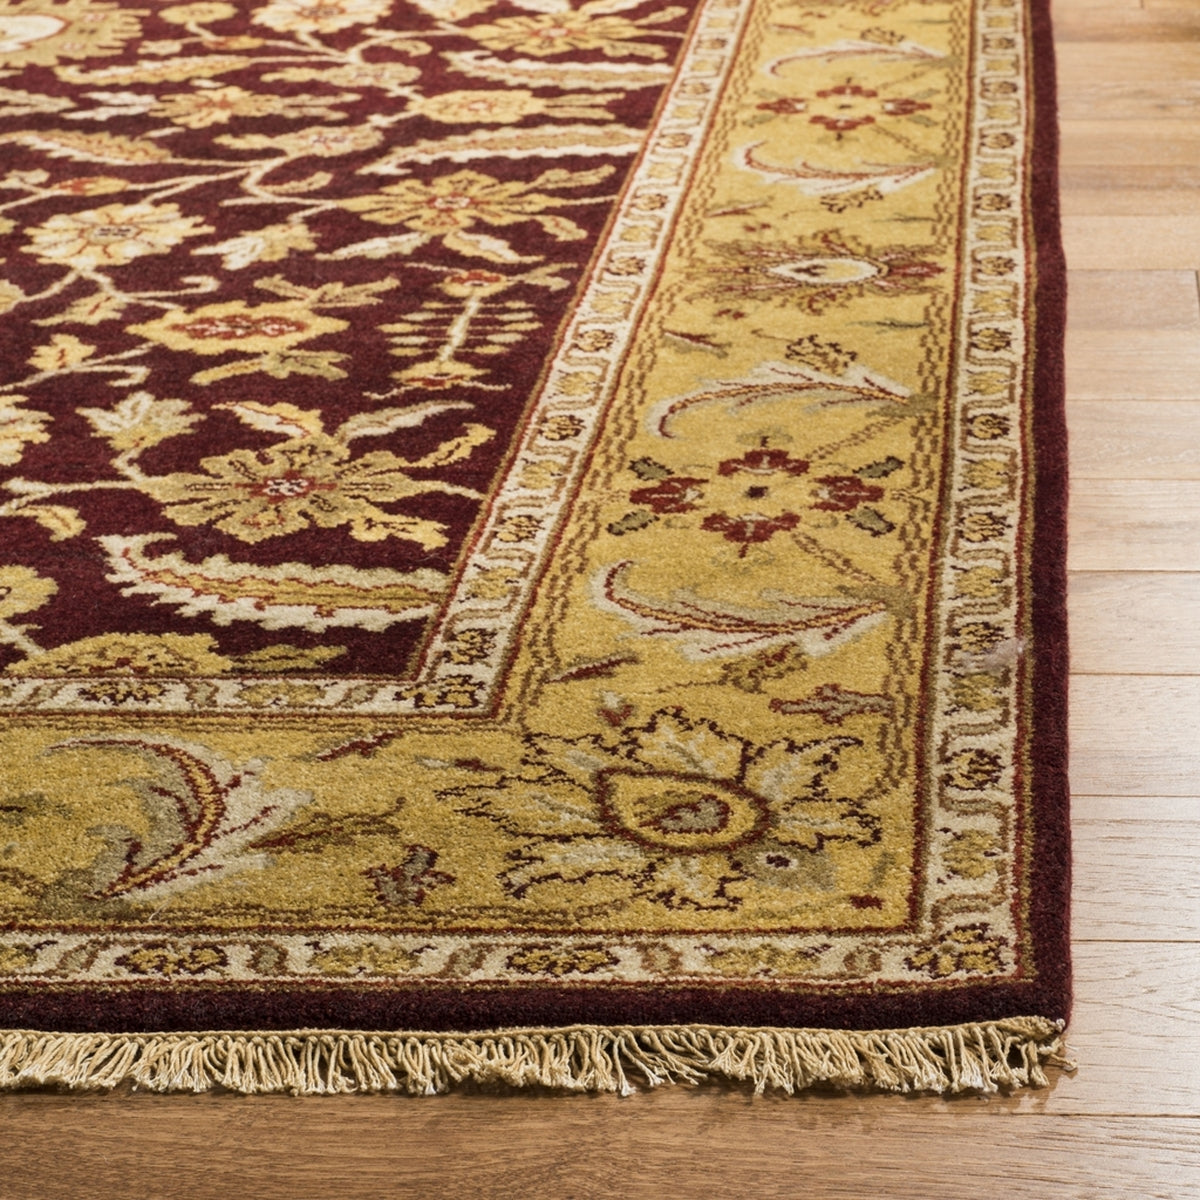 Safavieh Old World OW224 Red / Light Gold Area Rug